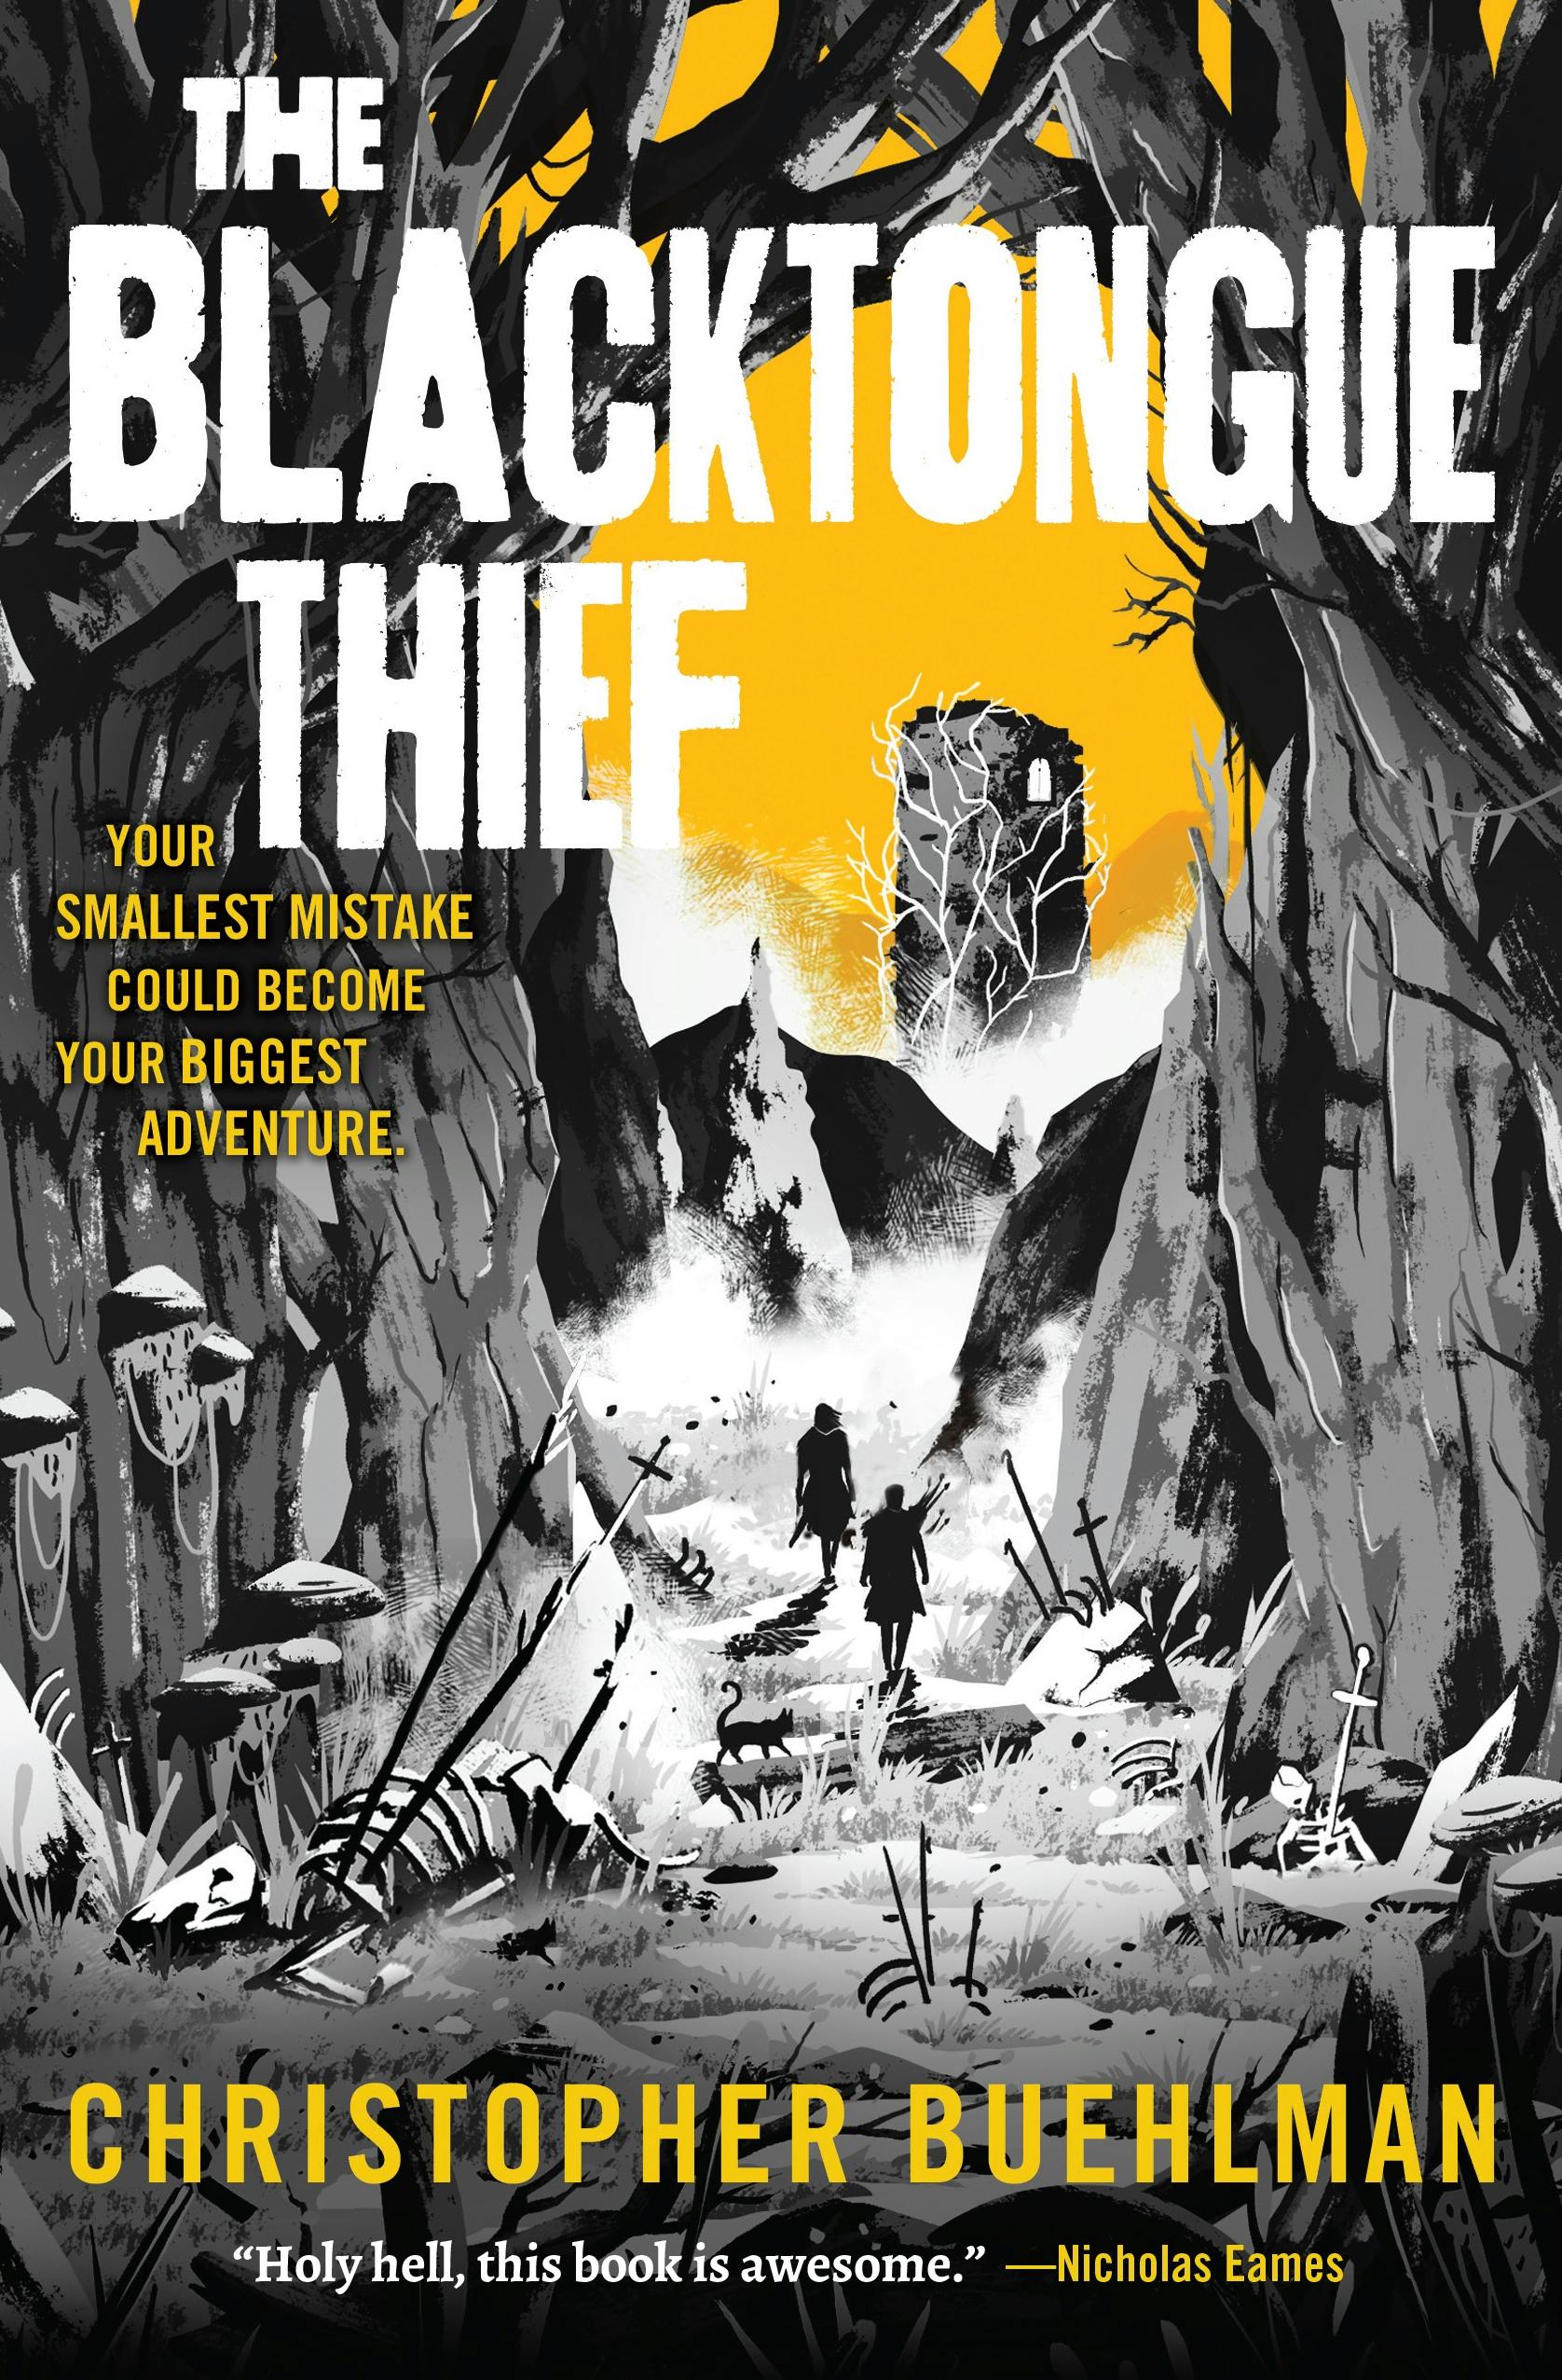 Cover for the book titled as: The Blacktongue Thief